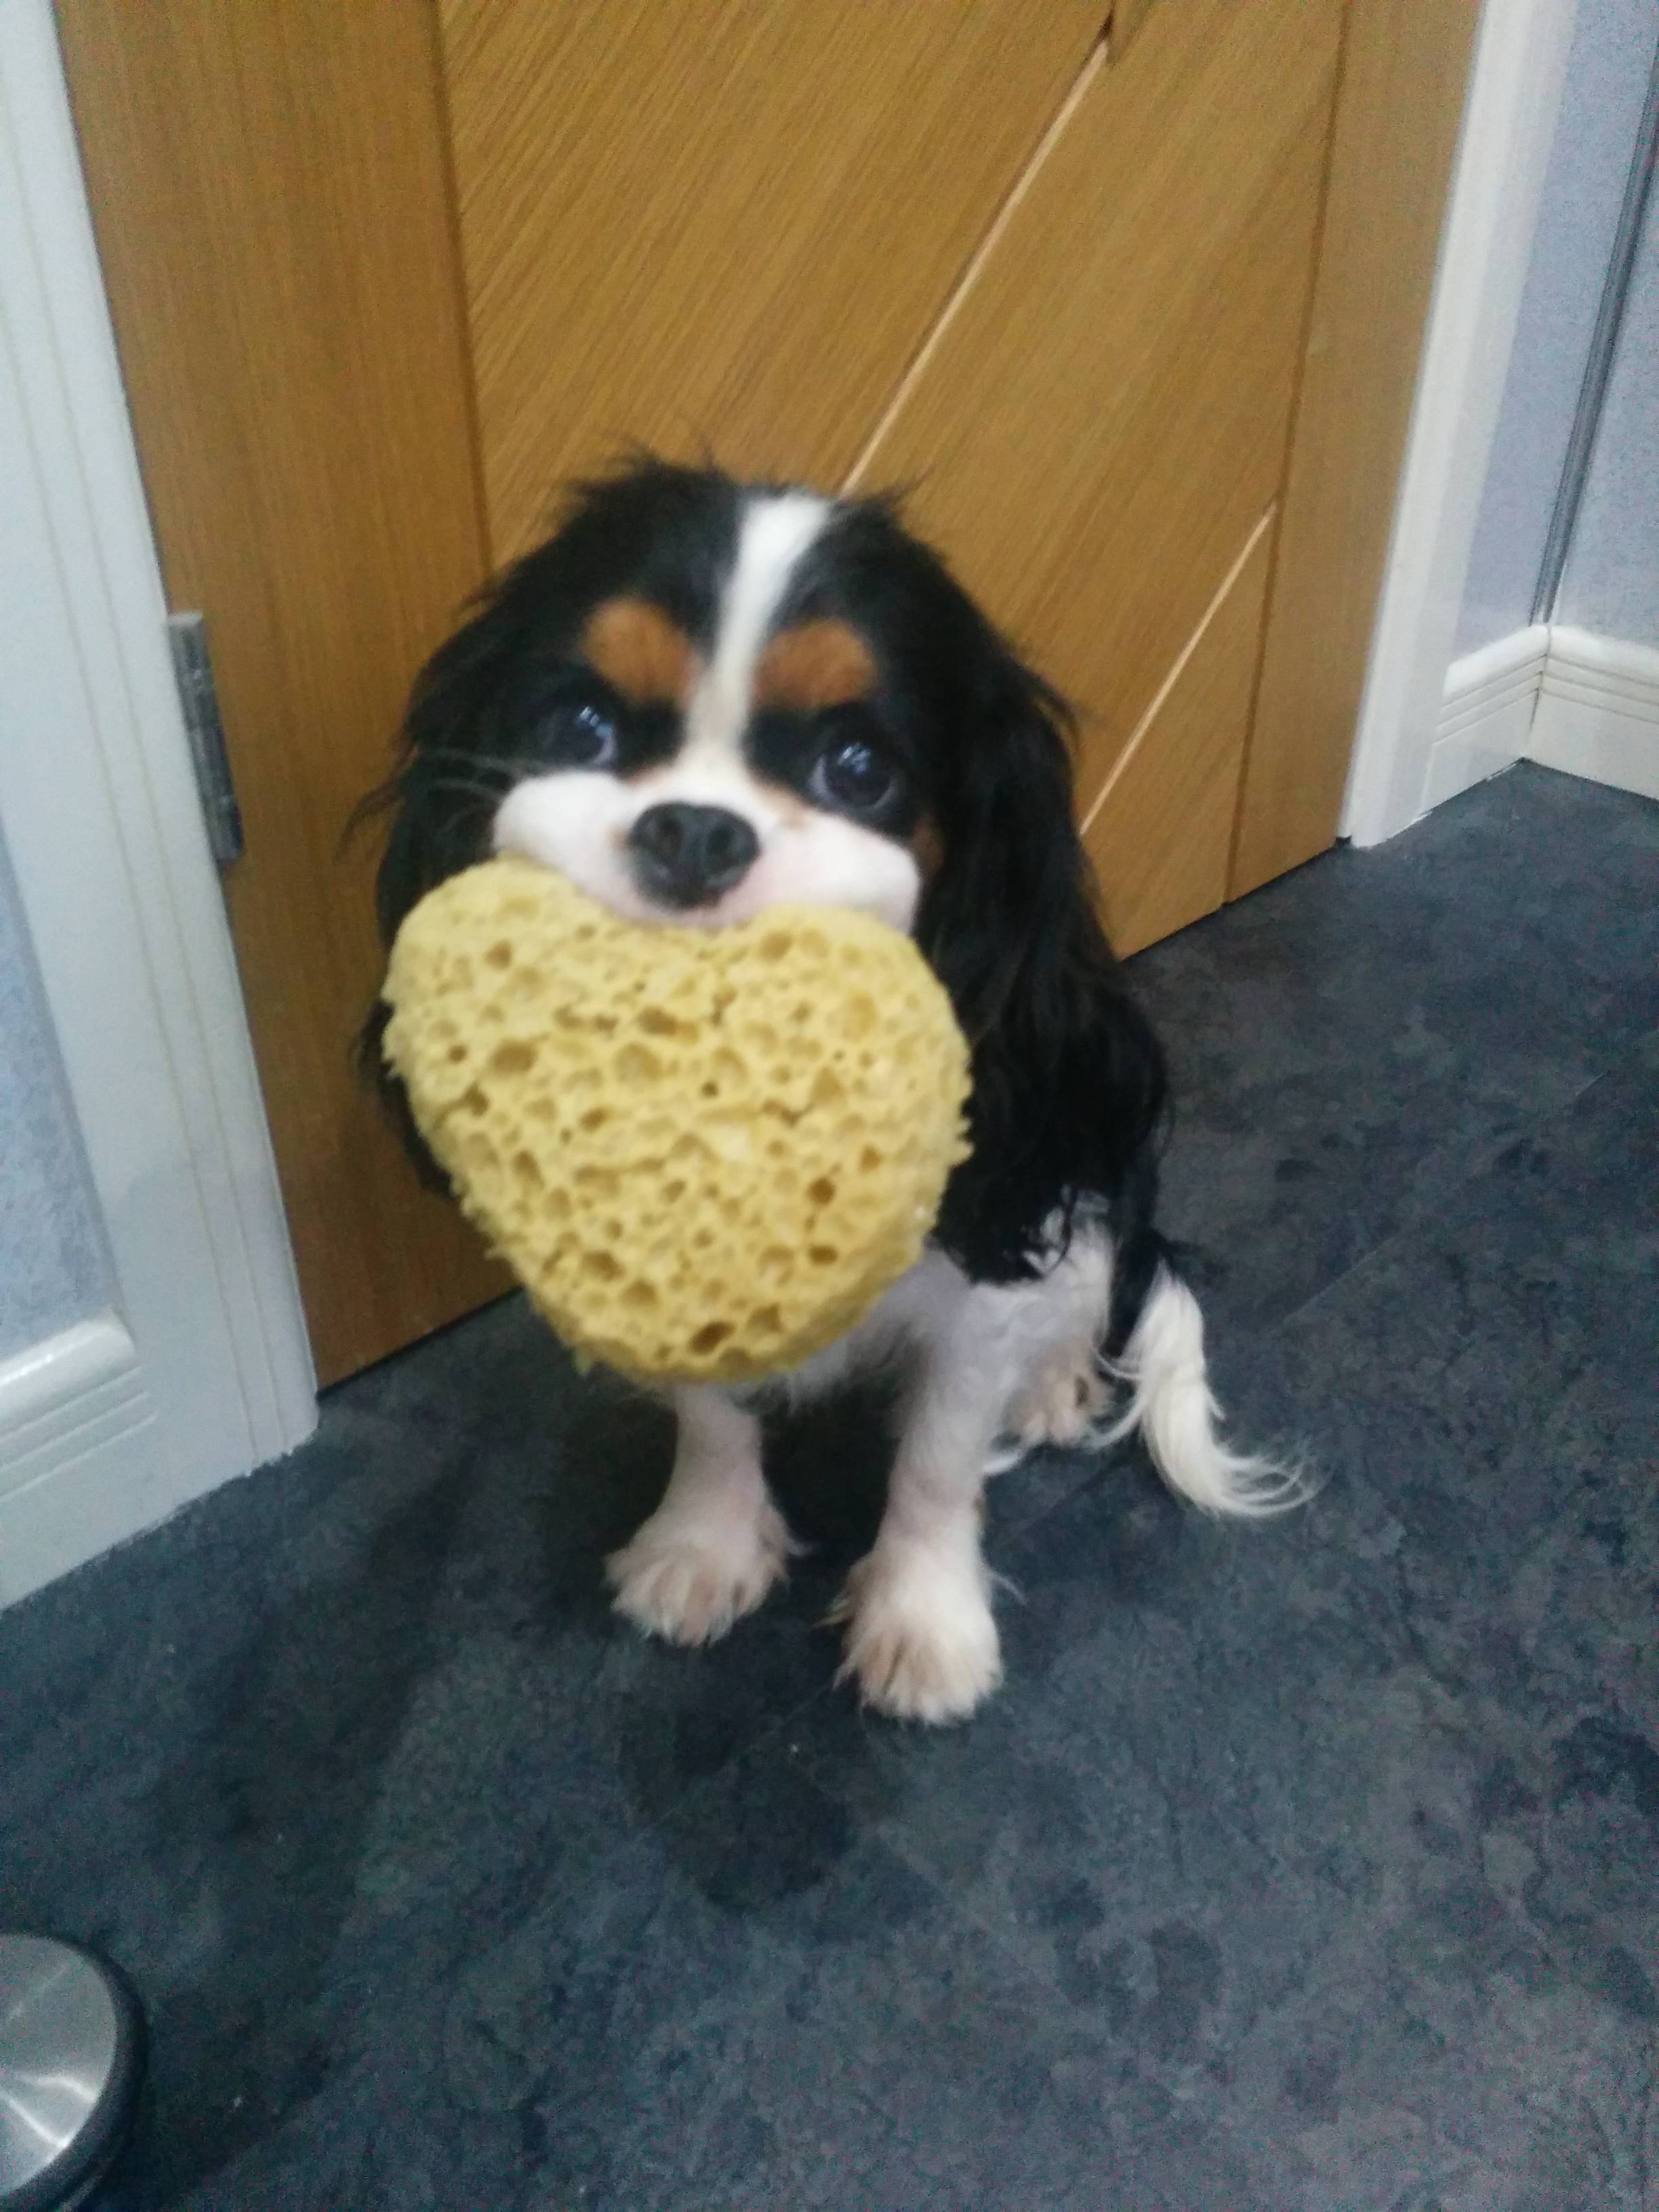 A King Charles Spaniel puppy sitting on the floor with a sponge in its mouth